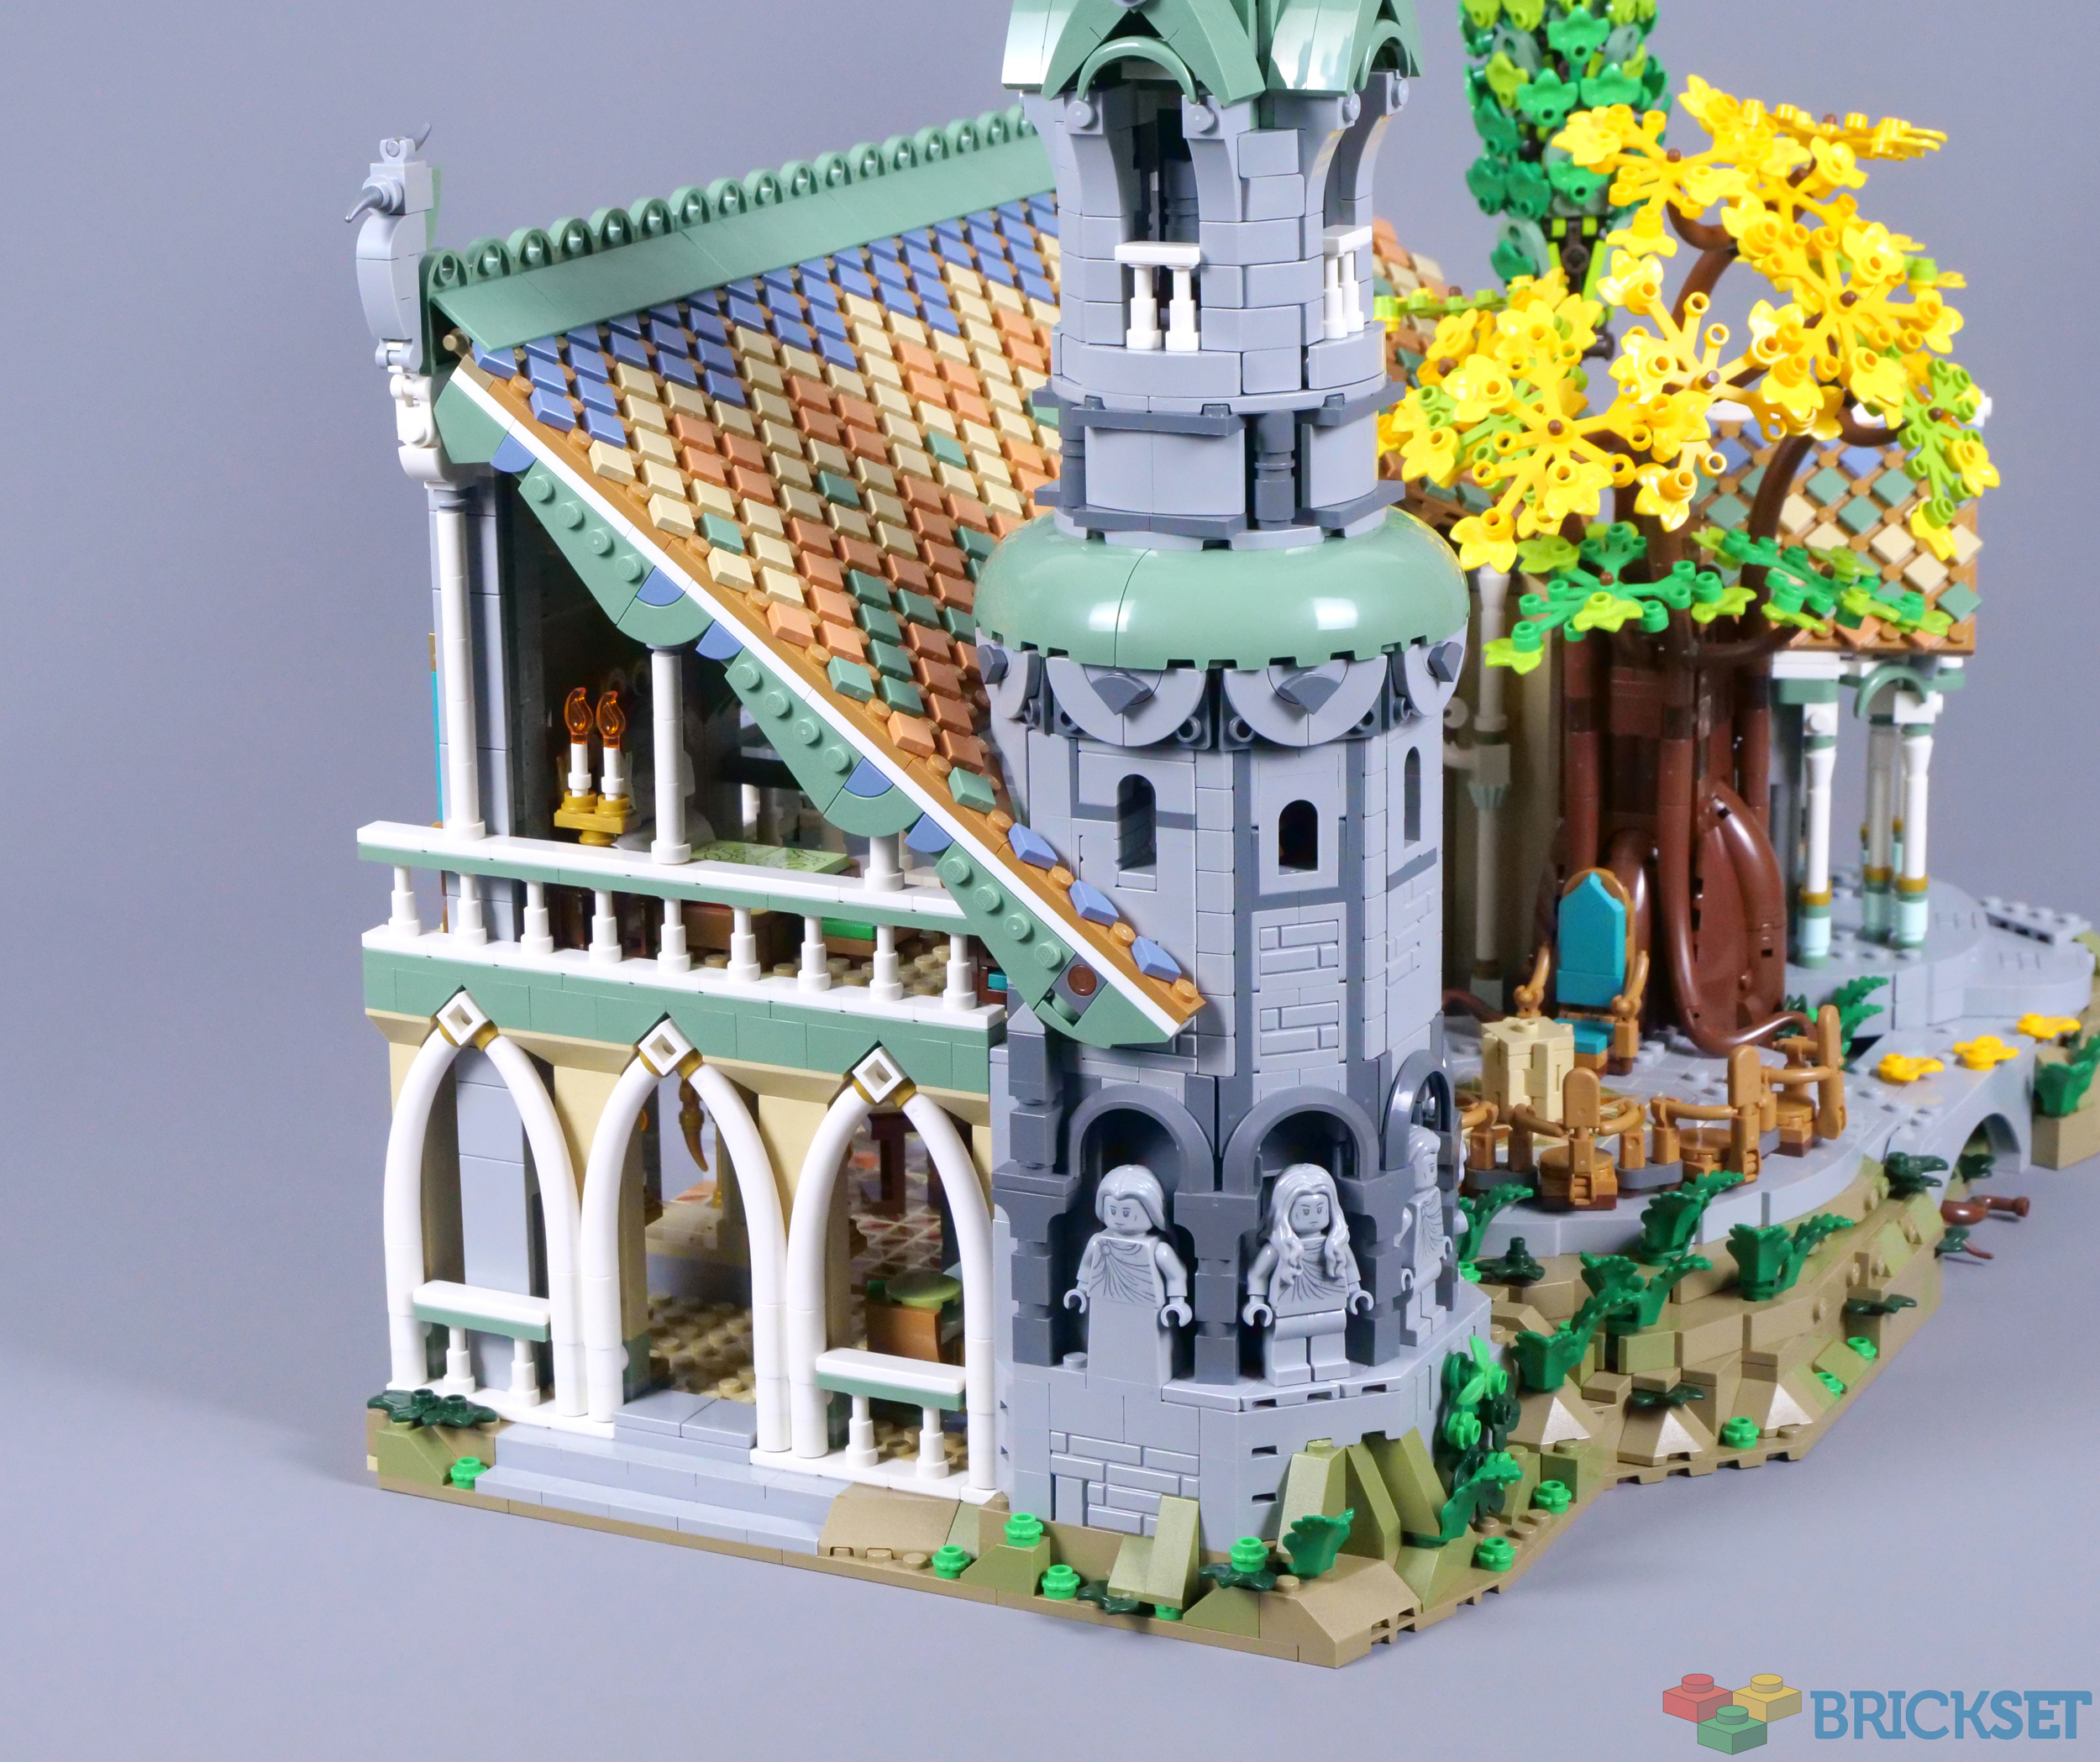 LEGO 10316 The Lord of the Rings Rivendell review